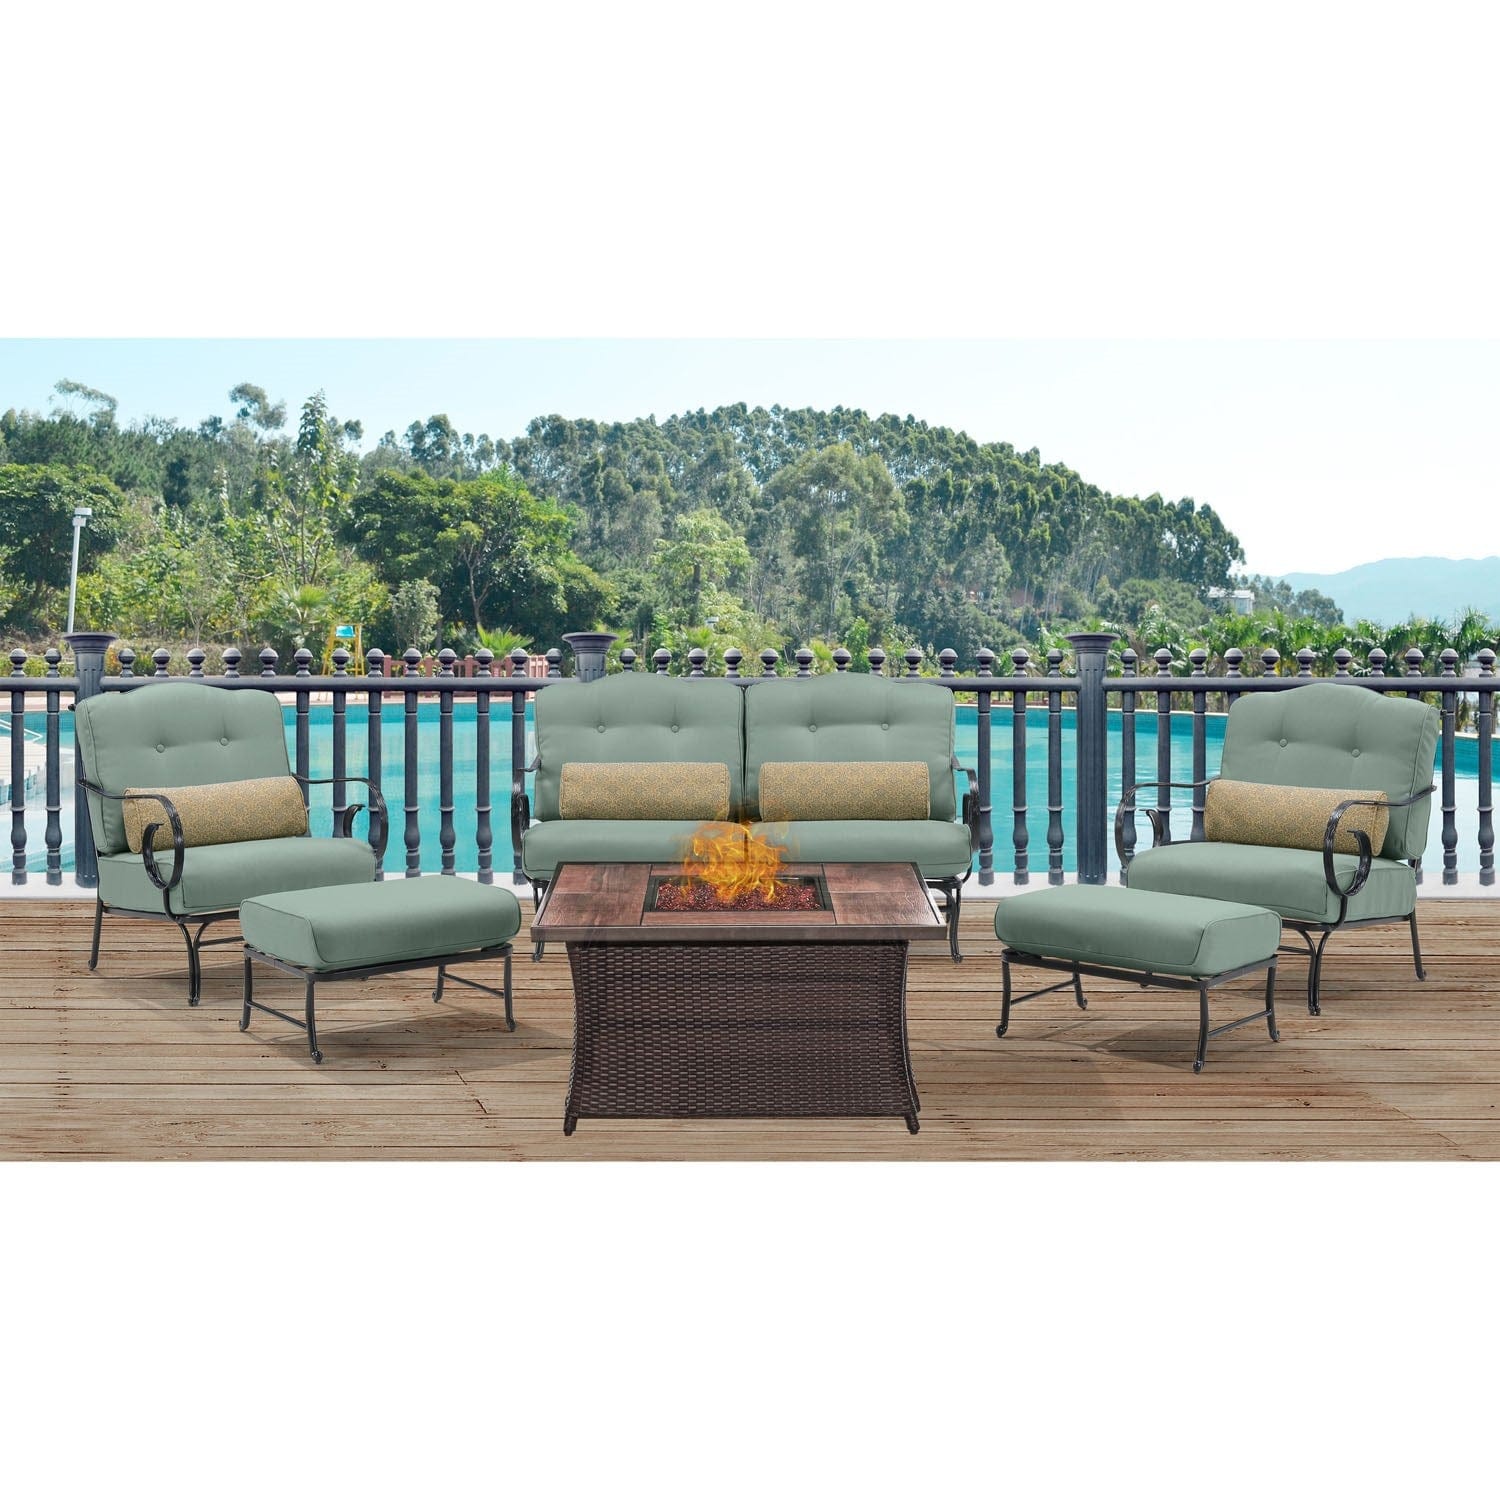 Hanover Fire Table Dining Set Hanover - Oceana 6pc Fire Pit Set with Wood Grain Tile Top | OCE6PCFP-BLU-WG